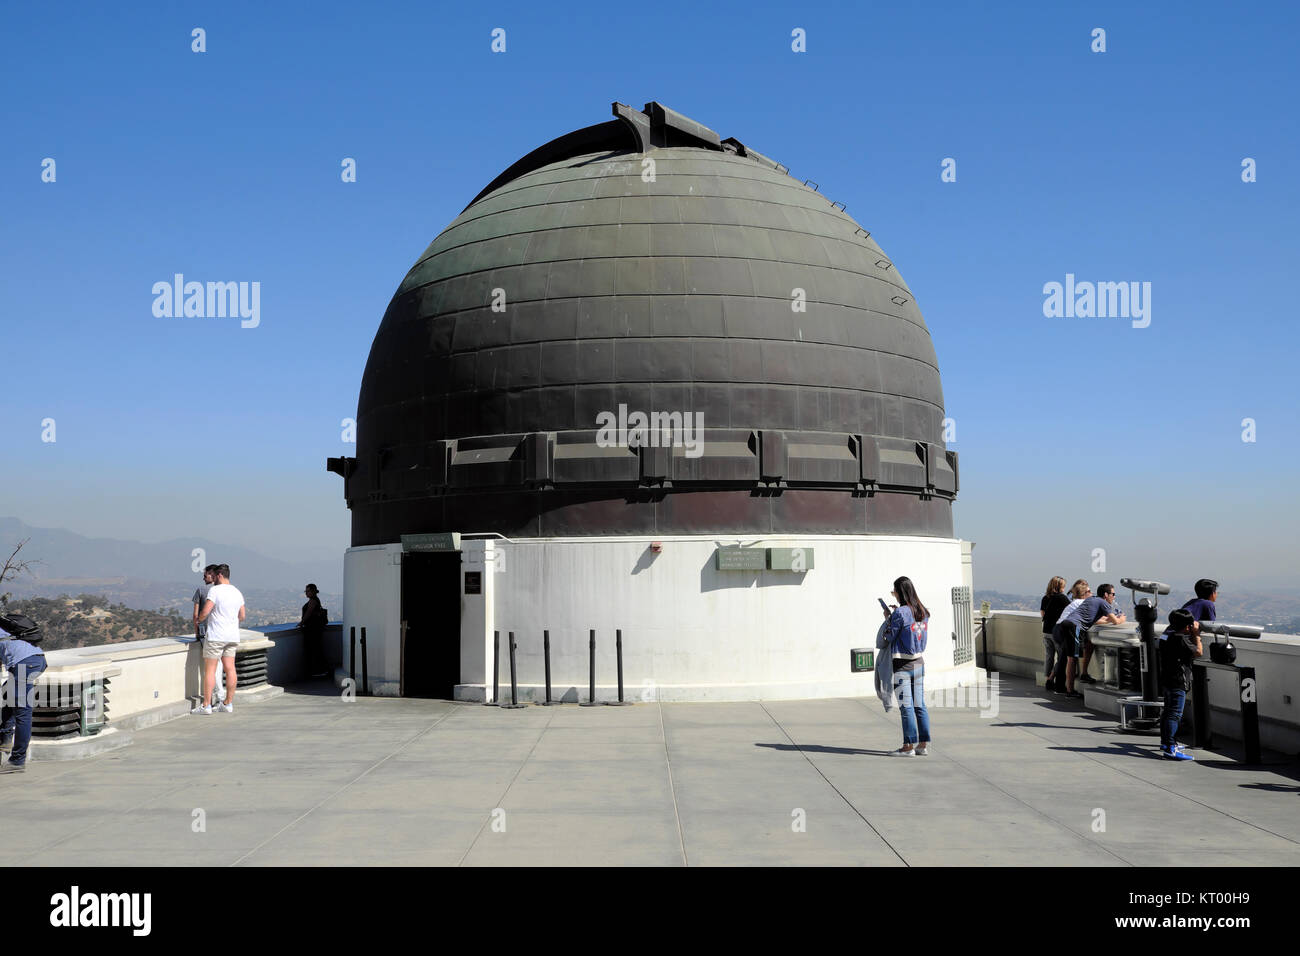 People outside the Planetarium building at the Griffith Observatory in Griffith Park in Los Angeles, California USA   KATHY DEWITT Stock Photo